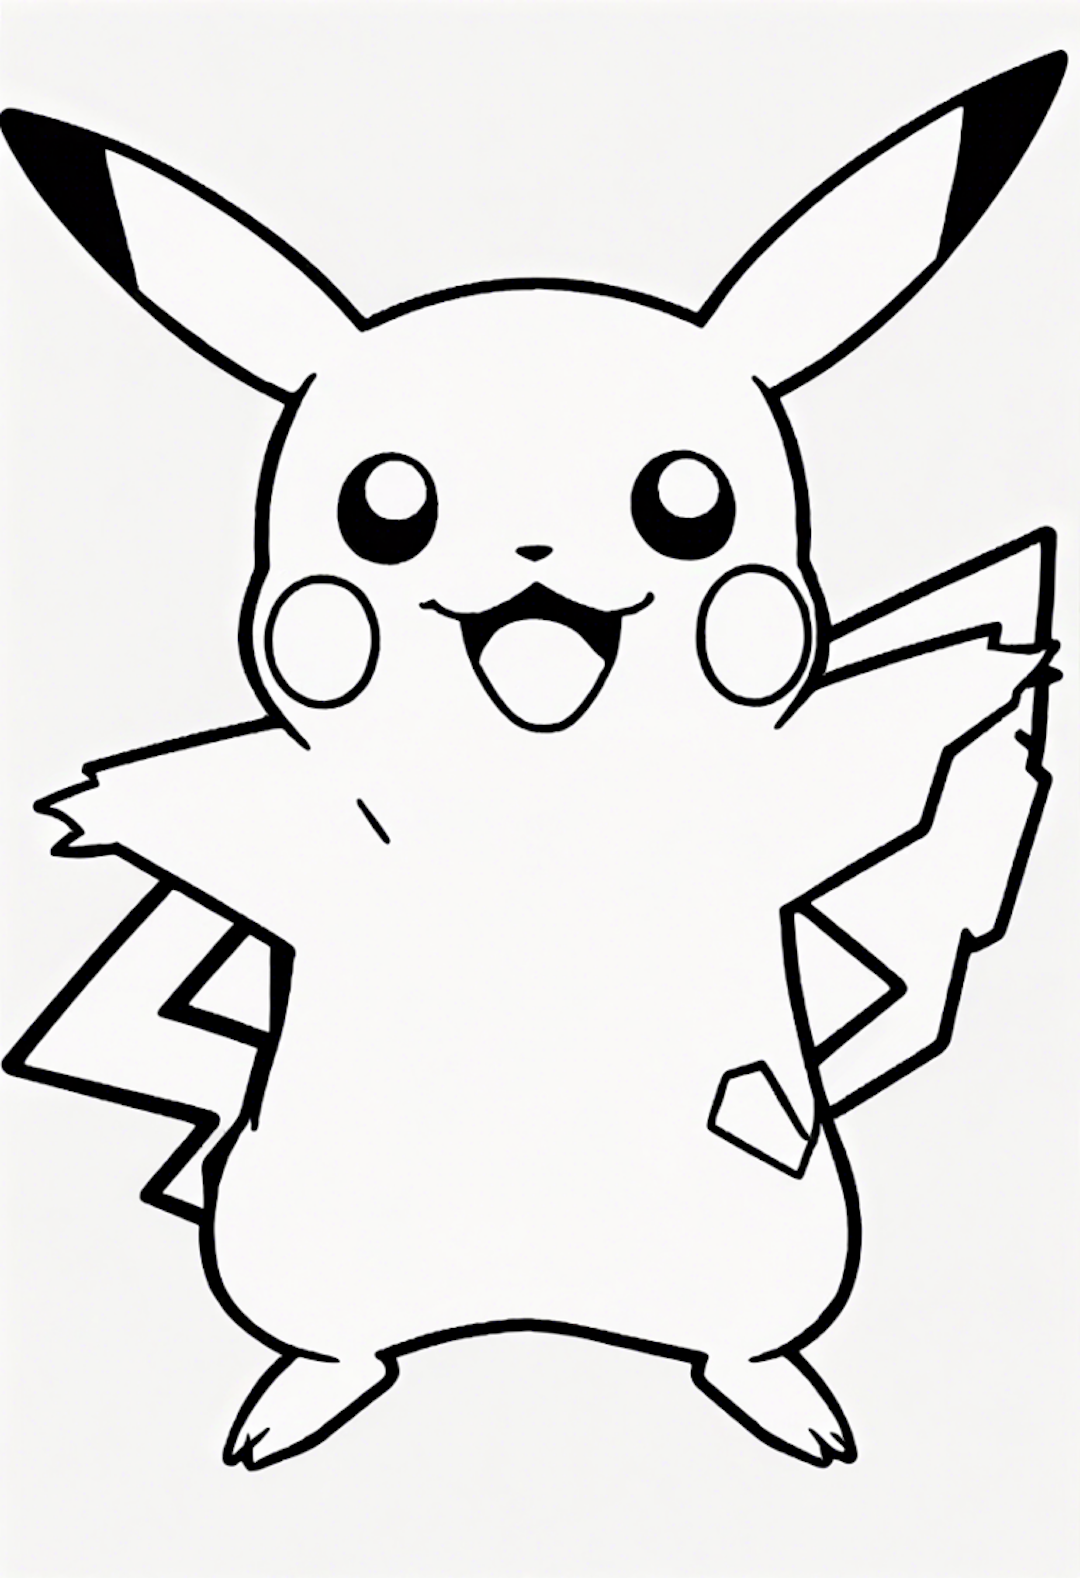 Pikachu Coloring Fun! coloring pages